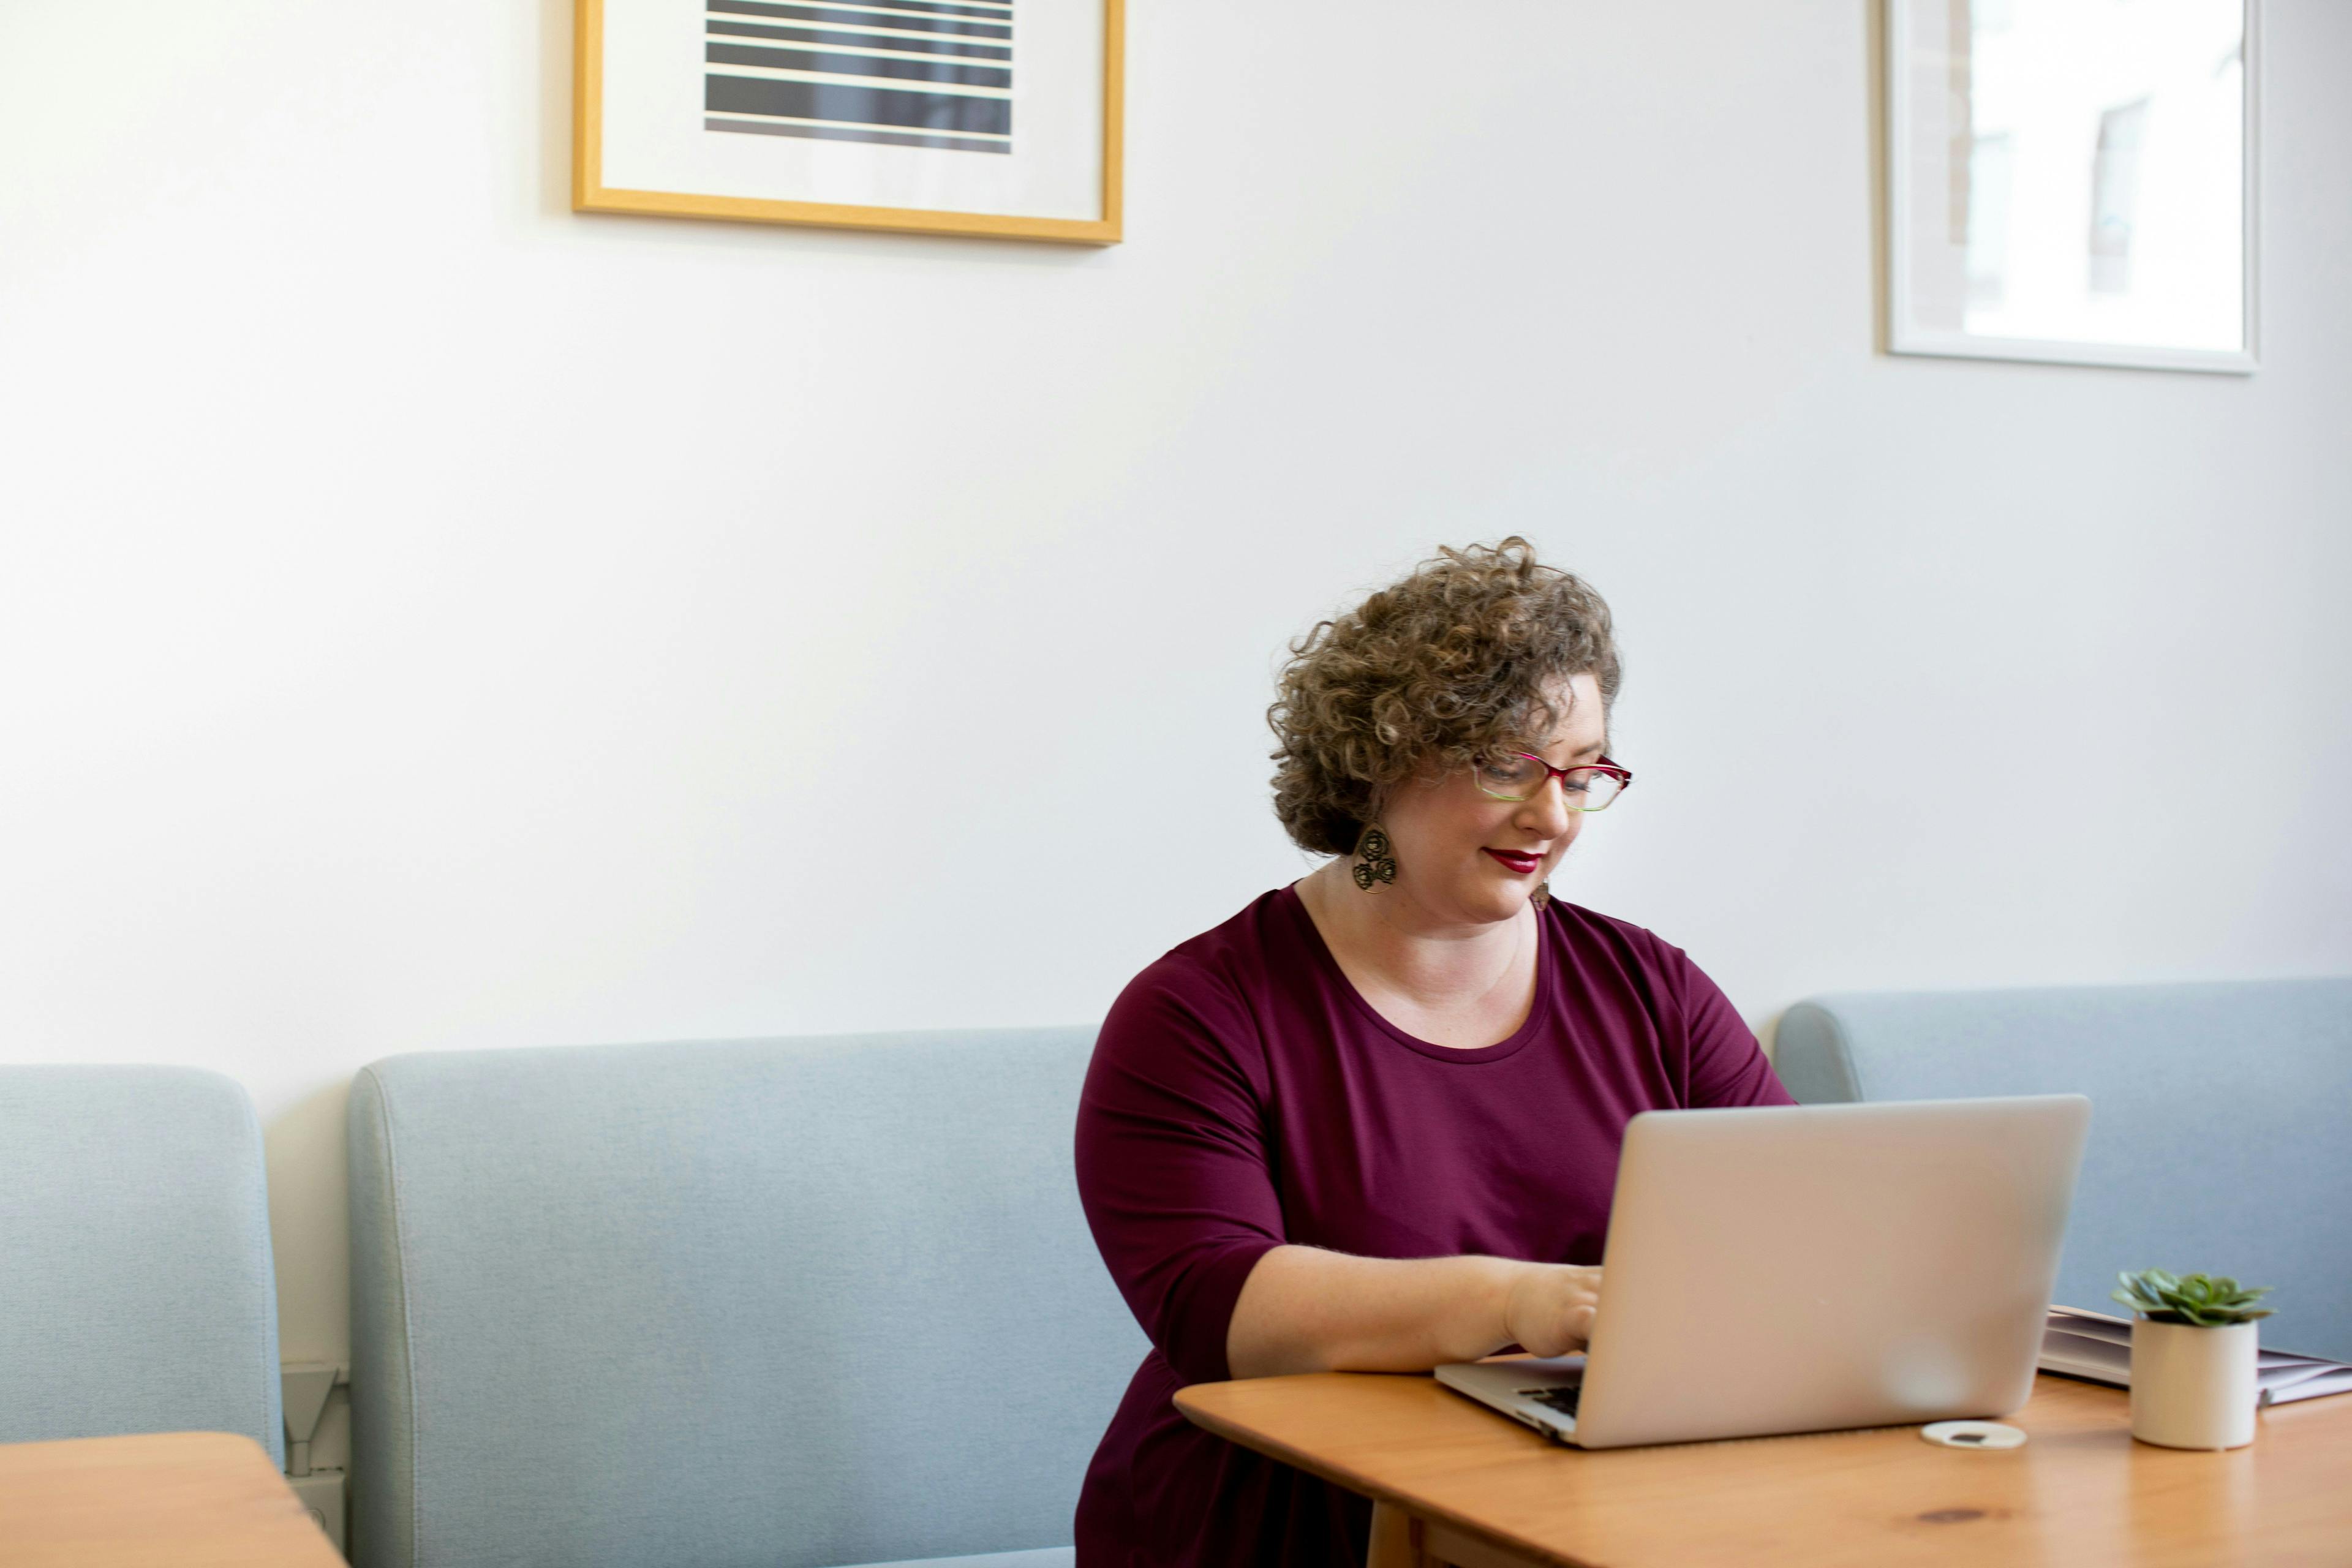 A woman with curly hair and glasses working on a laptop at a wooden table in a modern, minimalist room. The text 'how to create a landing page on Shopify' is implied by the context.